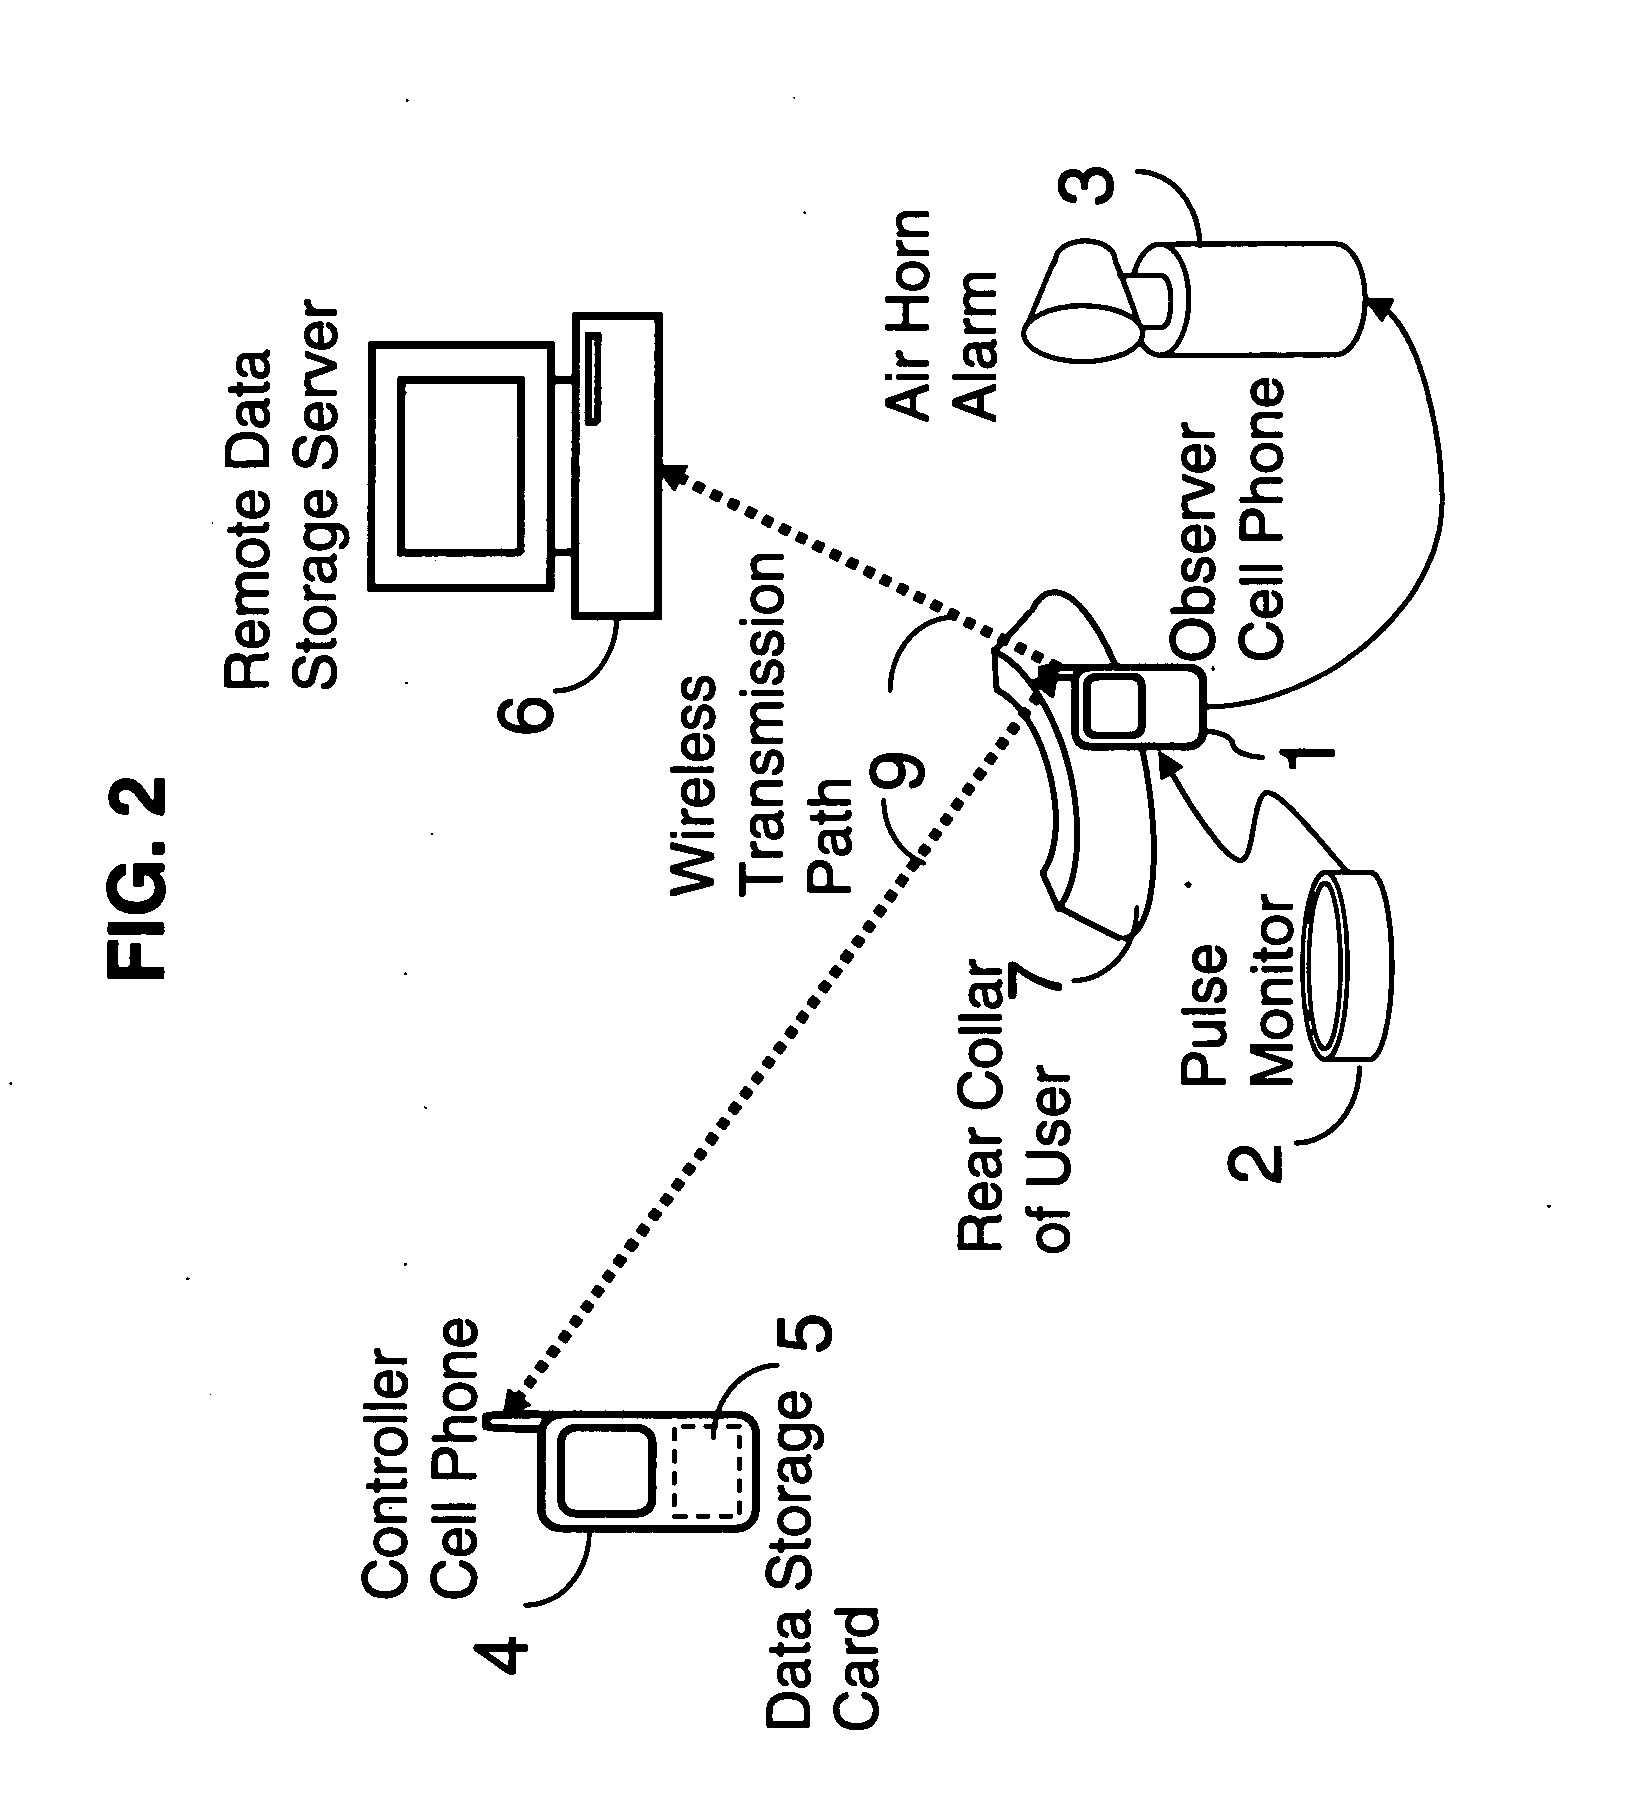 Personal alarm and serveillance system